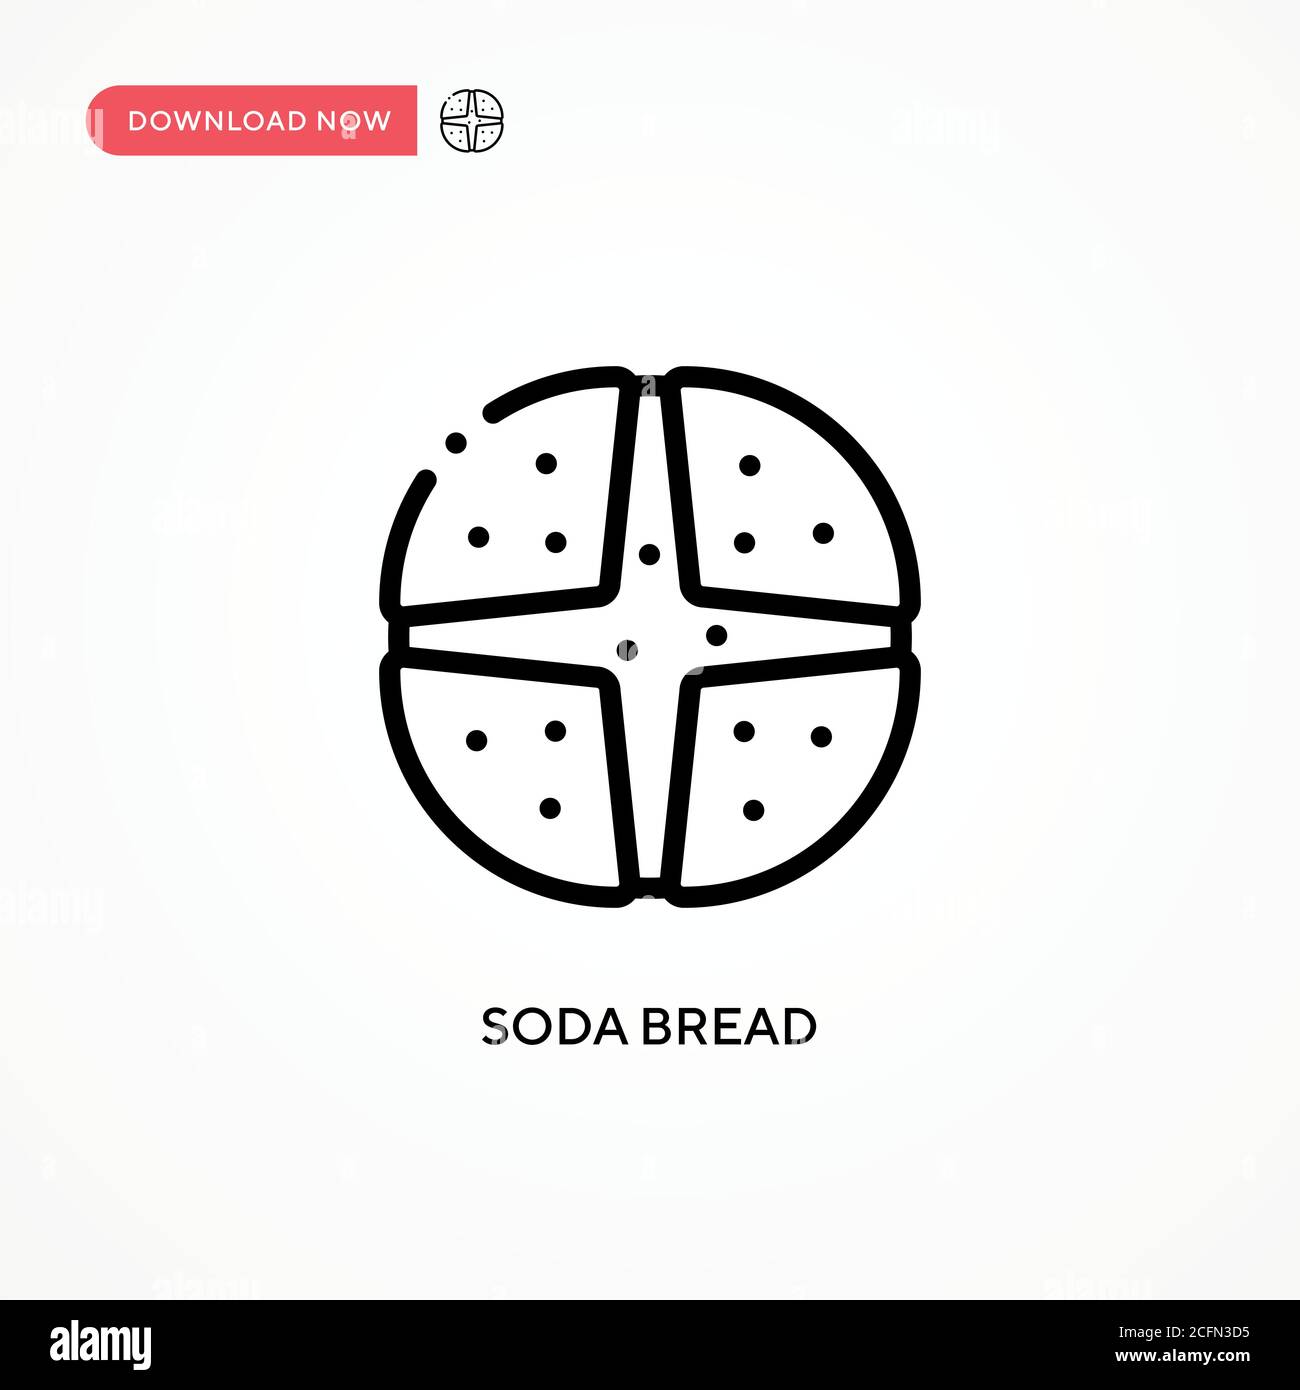 Soda bread vector icon. Modern, simple flat vector illustration for web site or mobile app Stock Vector